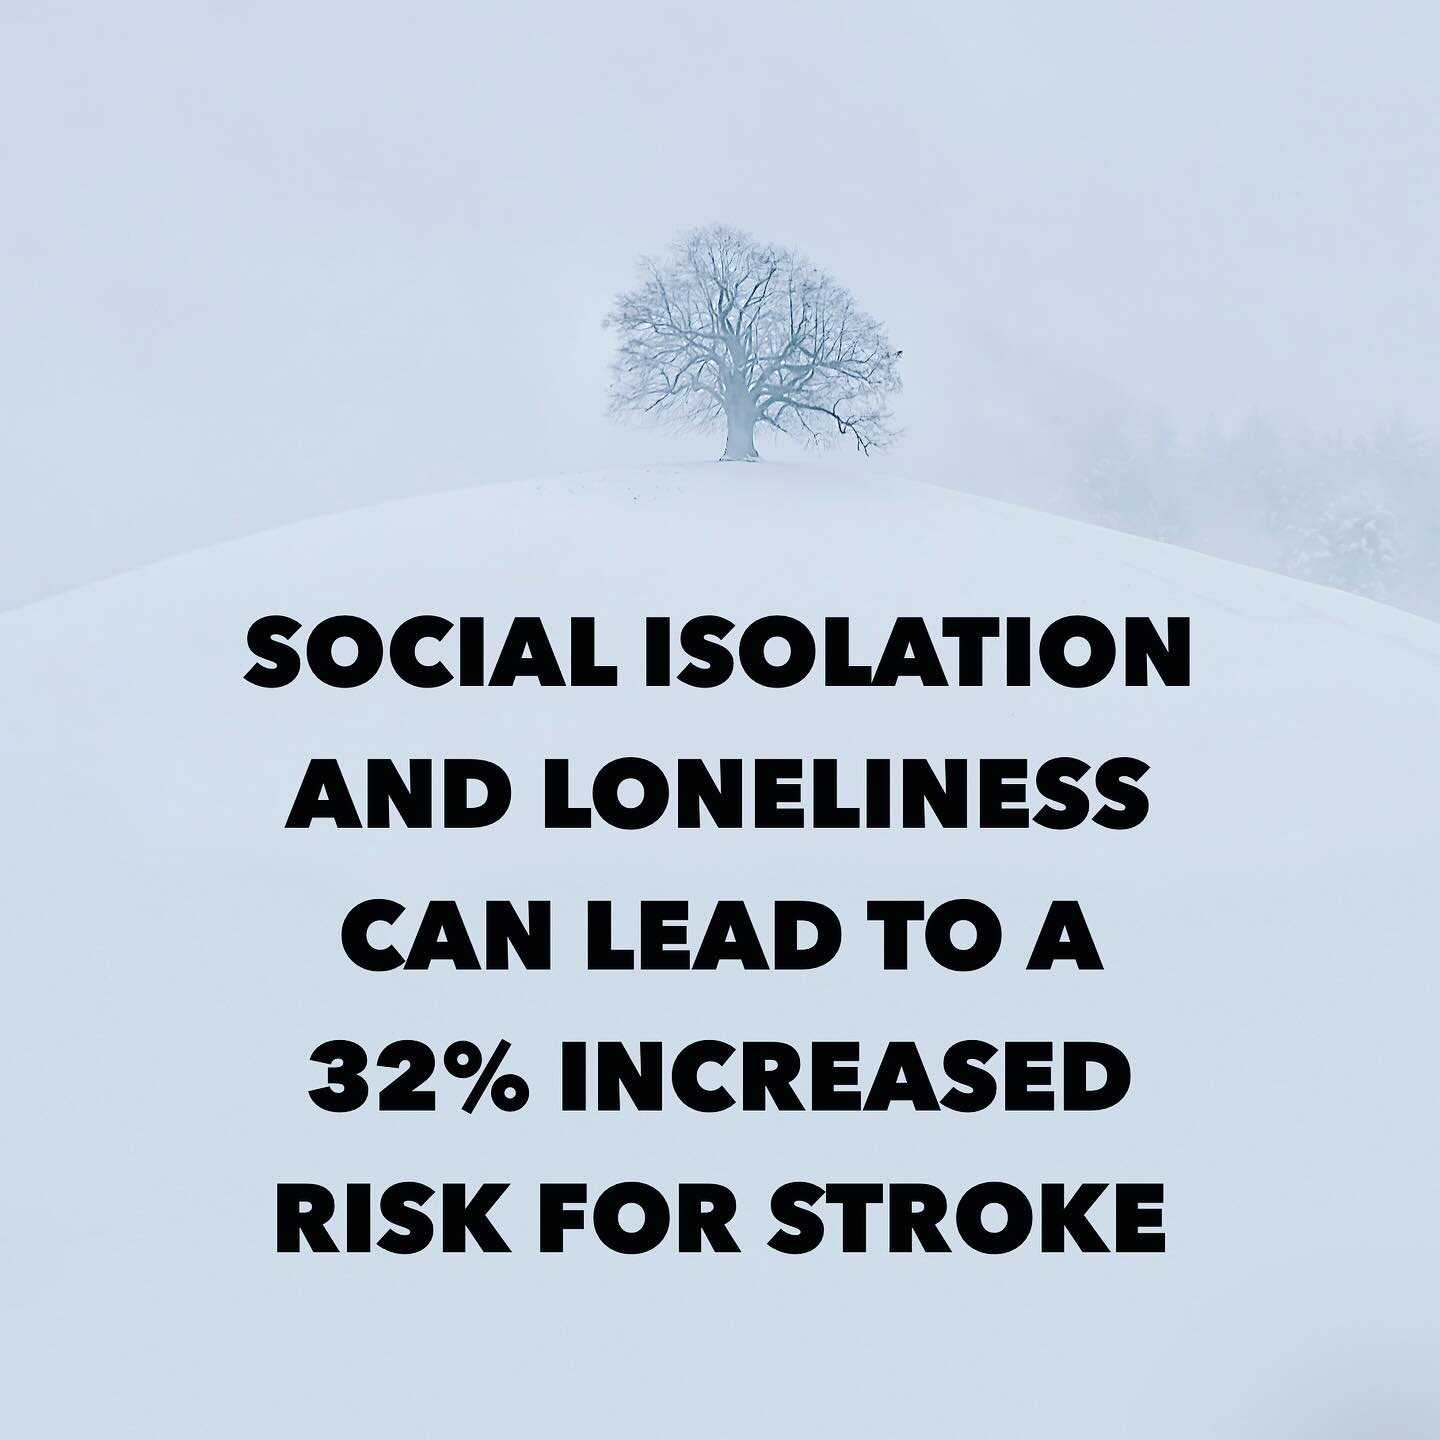 We are currently experiencing a loneliness epidemic in the United States.

Loneliness can cause all kinds of issues, but in terms of stroke in particular, this is a staggering statistic:

Social isolation and loneliness can lead to a 32% increased ri